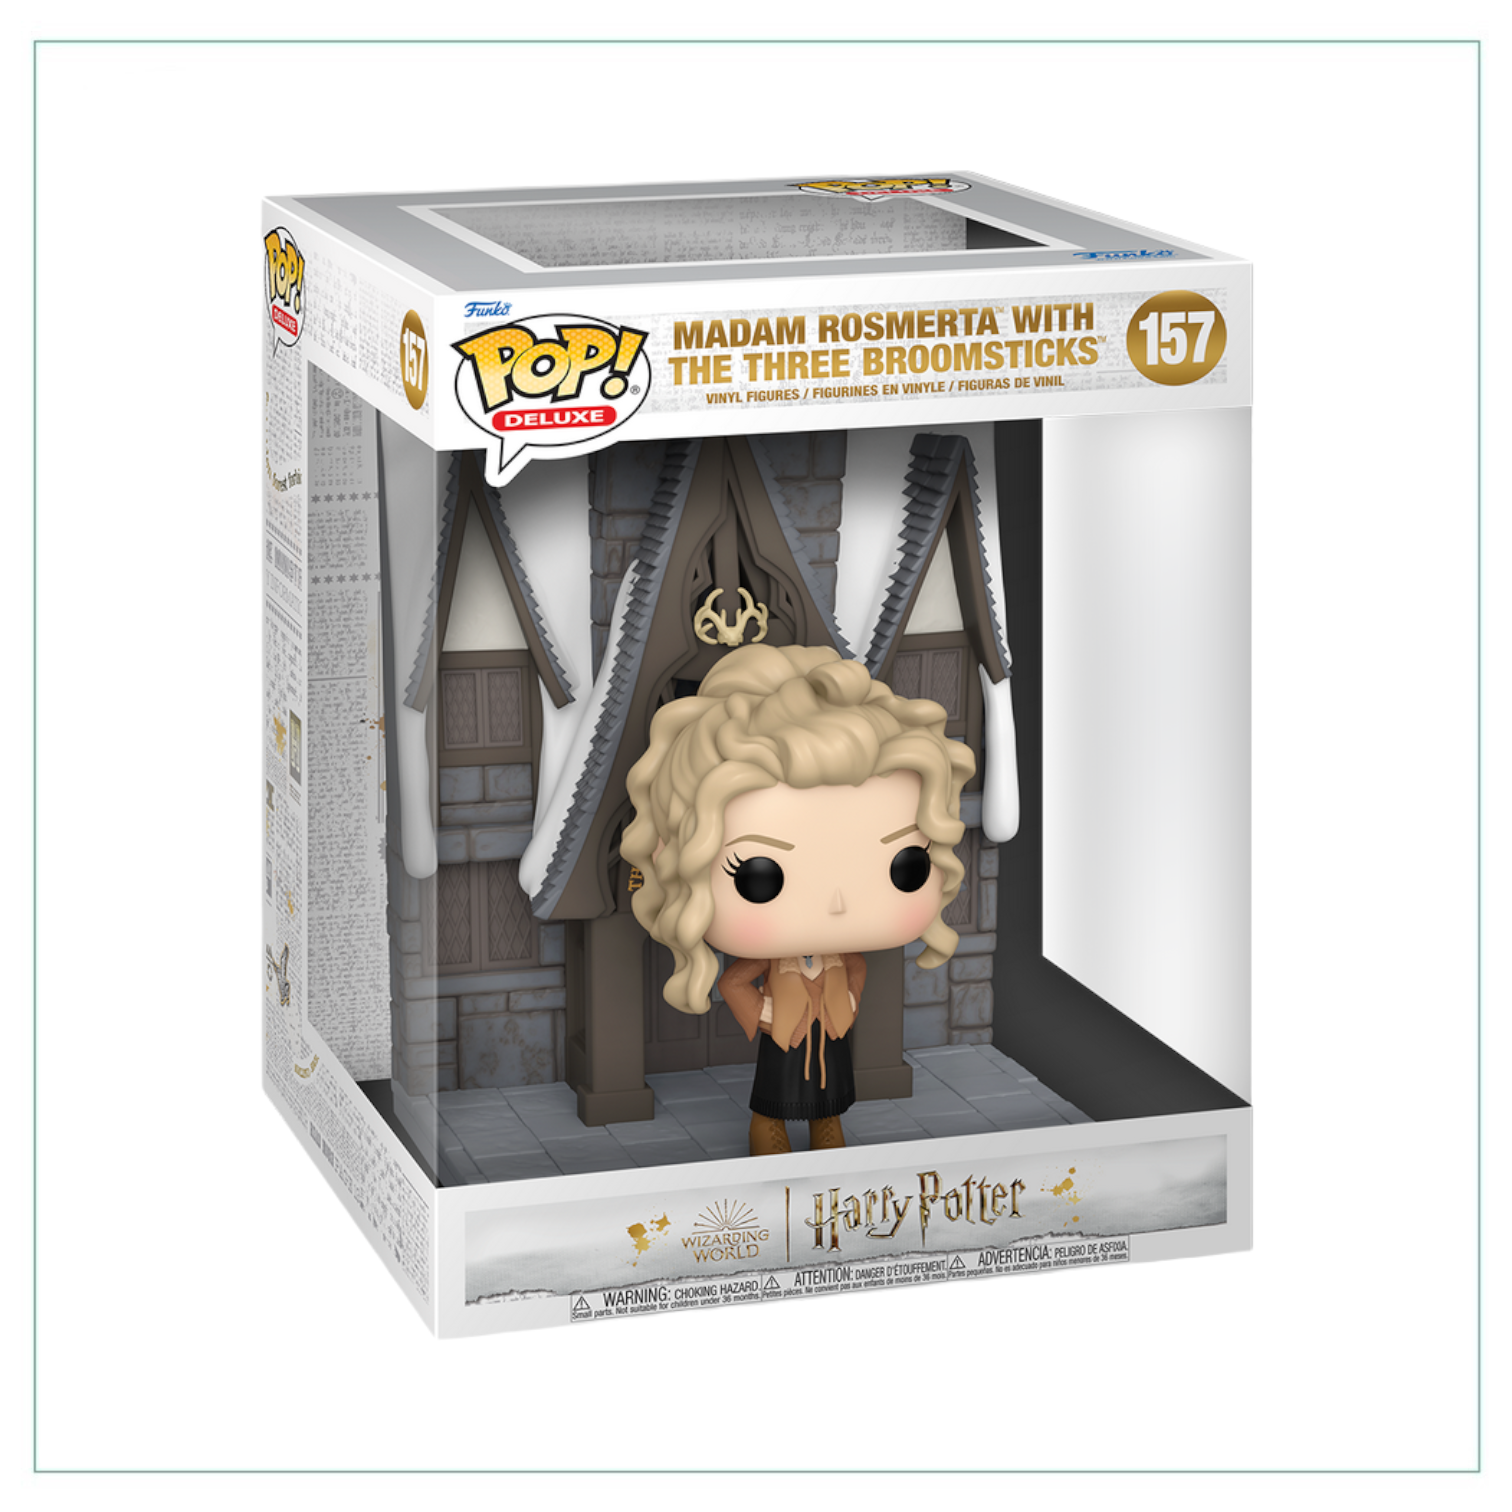 Madame Rosmerta With The Three Broomsticks #157 Deluxe Funko Pop! Harry Potter